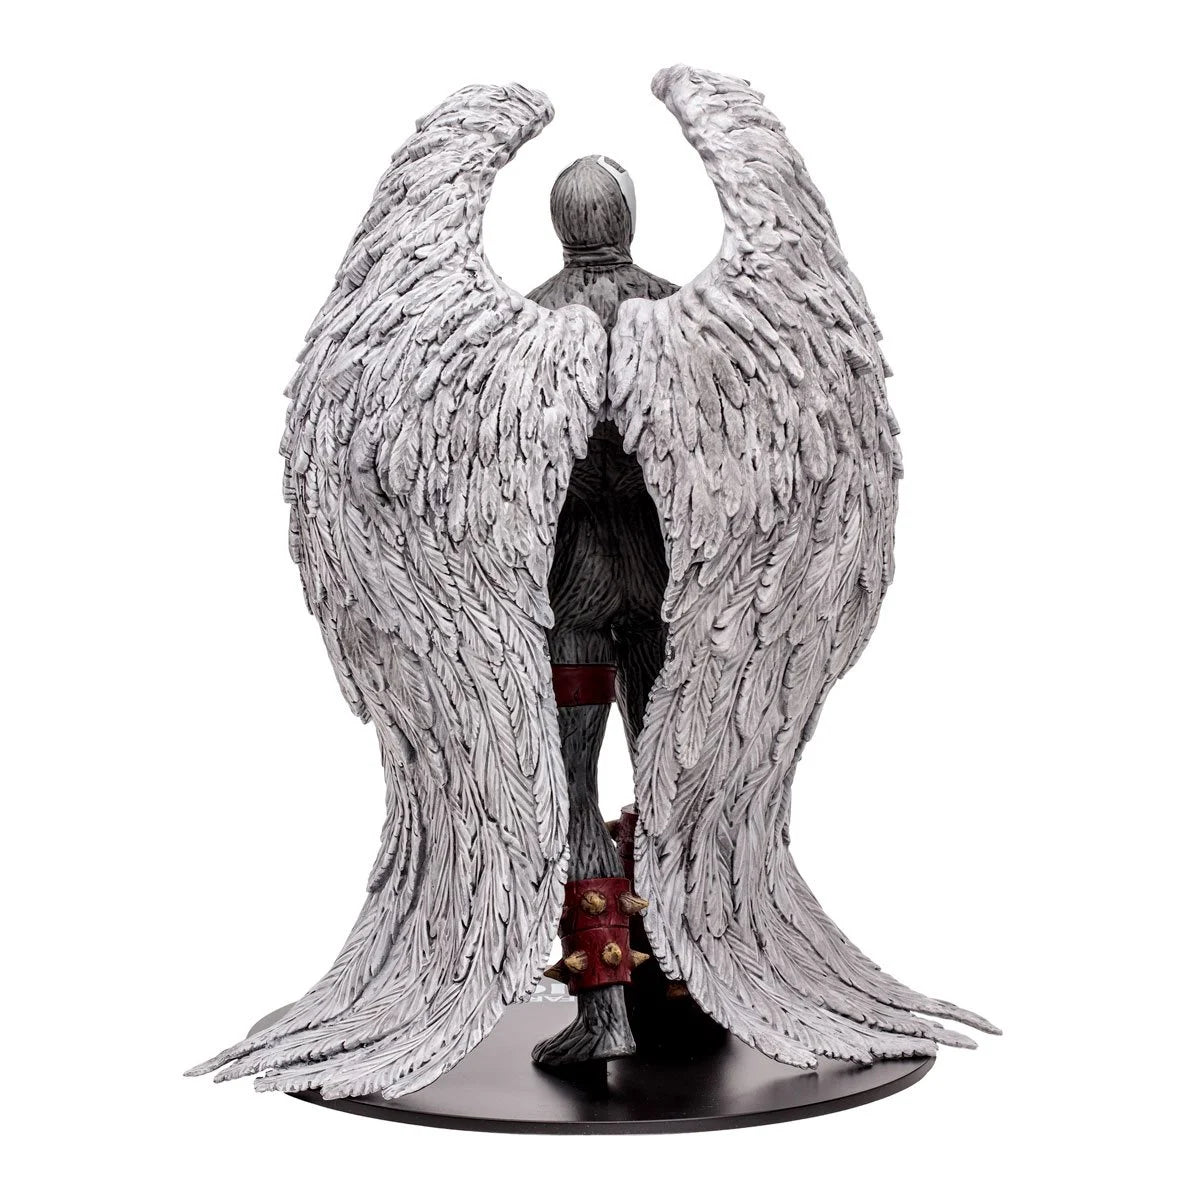 (PREVENTA)  Spawn Wings of Redemption 1:8 Scale Statue with McFarlane Toys Digital Collectible